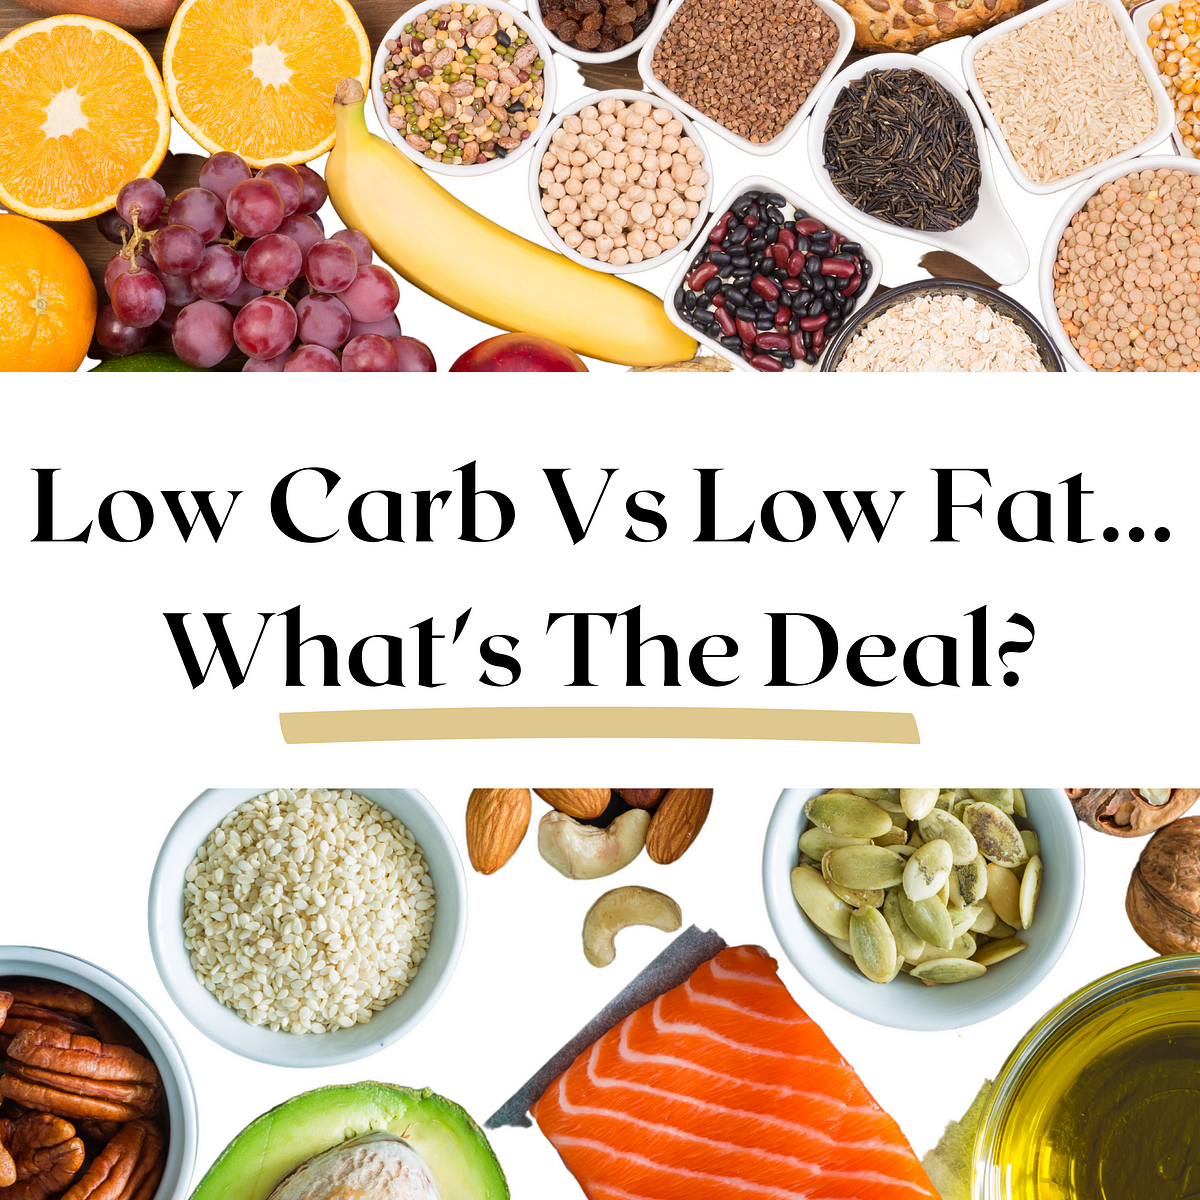 Low Carb Vs Low Fat Diets For Weight Loss | by Dylan Dacosta | In ...